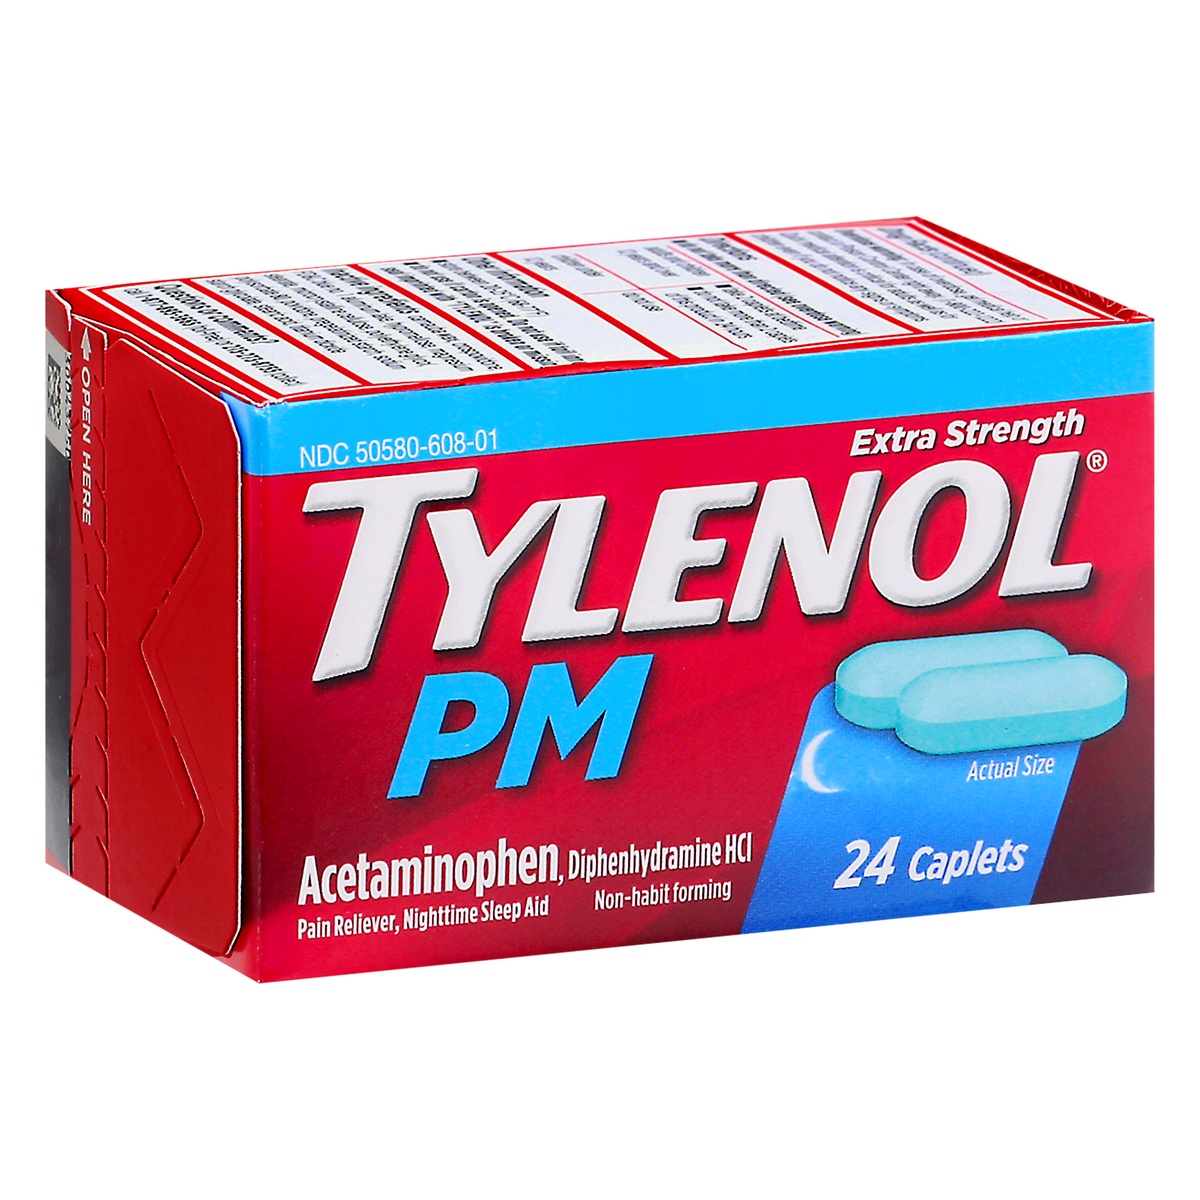 slide 2 of 10, Tylenol PM Extra Strength Nighttime Pain Reliever & Sleep Aid Caplets Acetaminophen & Diphenhydramine HCl, Relief for Nighttime Aches & Pains, Non-Habit Forming, 24 ct